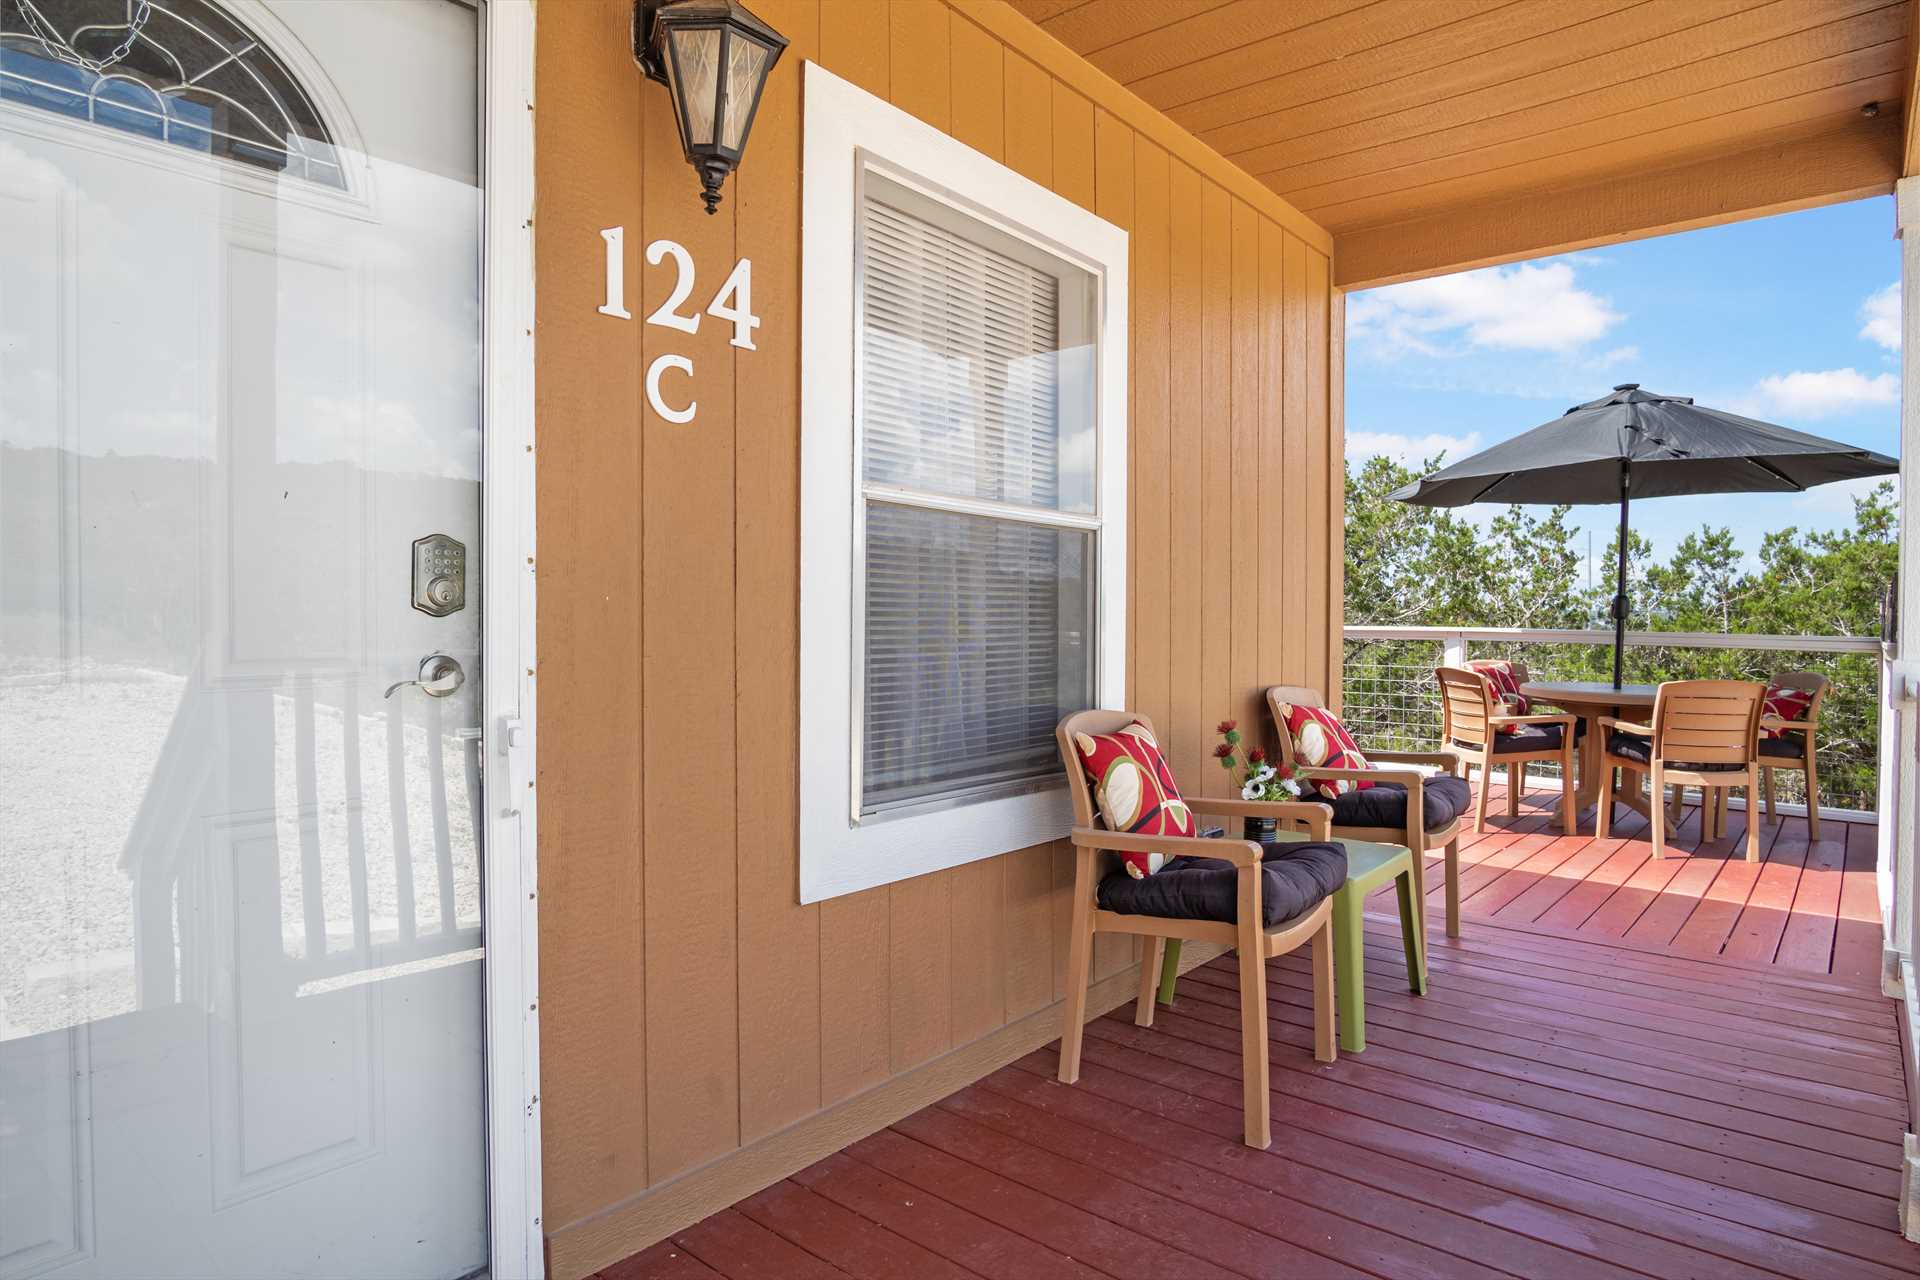                                                 The front porch is a cozy spot to enjoy a glass of wine and intimate conversation.